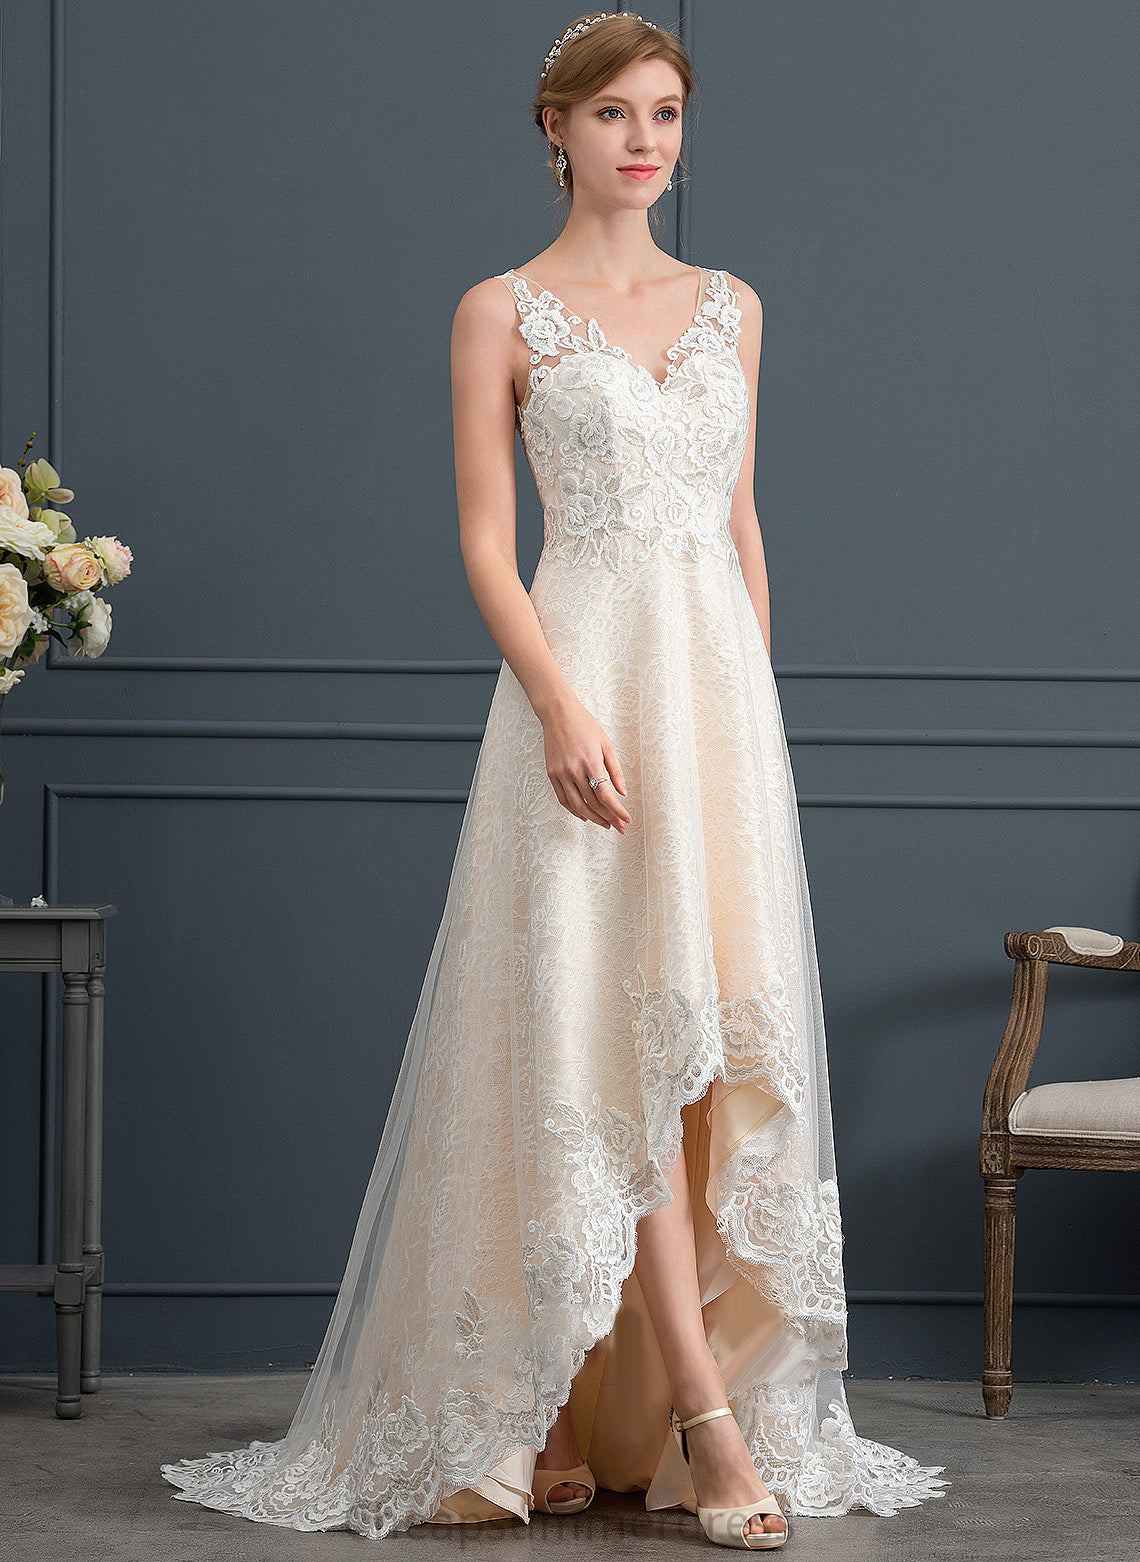 With Dress Wedding Tulle Wedding Dresses V-neck Asymmetrical A-Line Morgan Lace